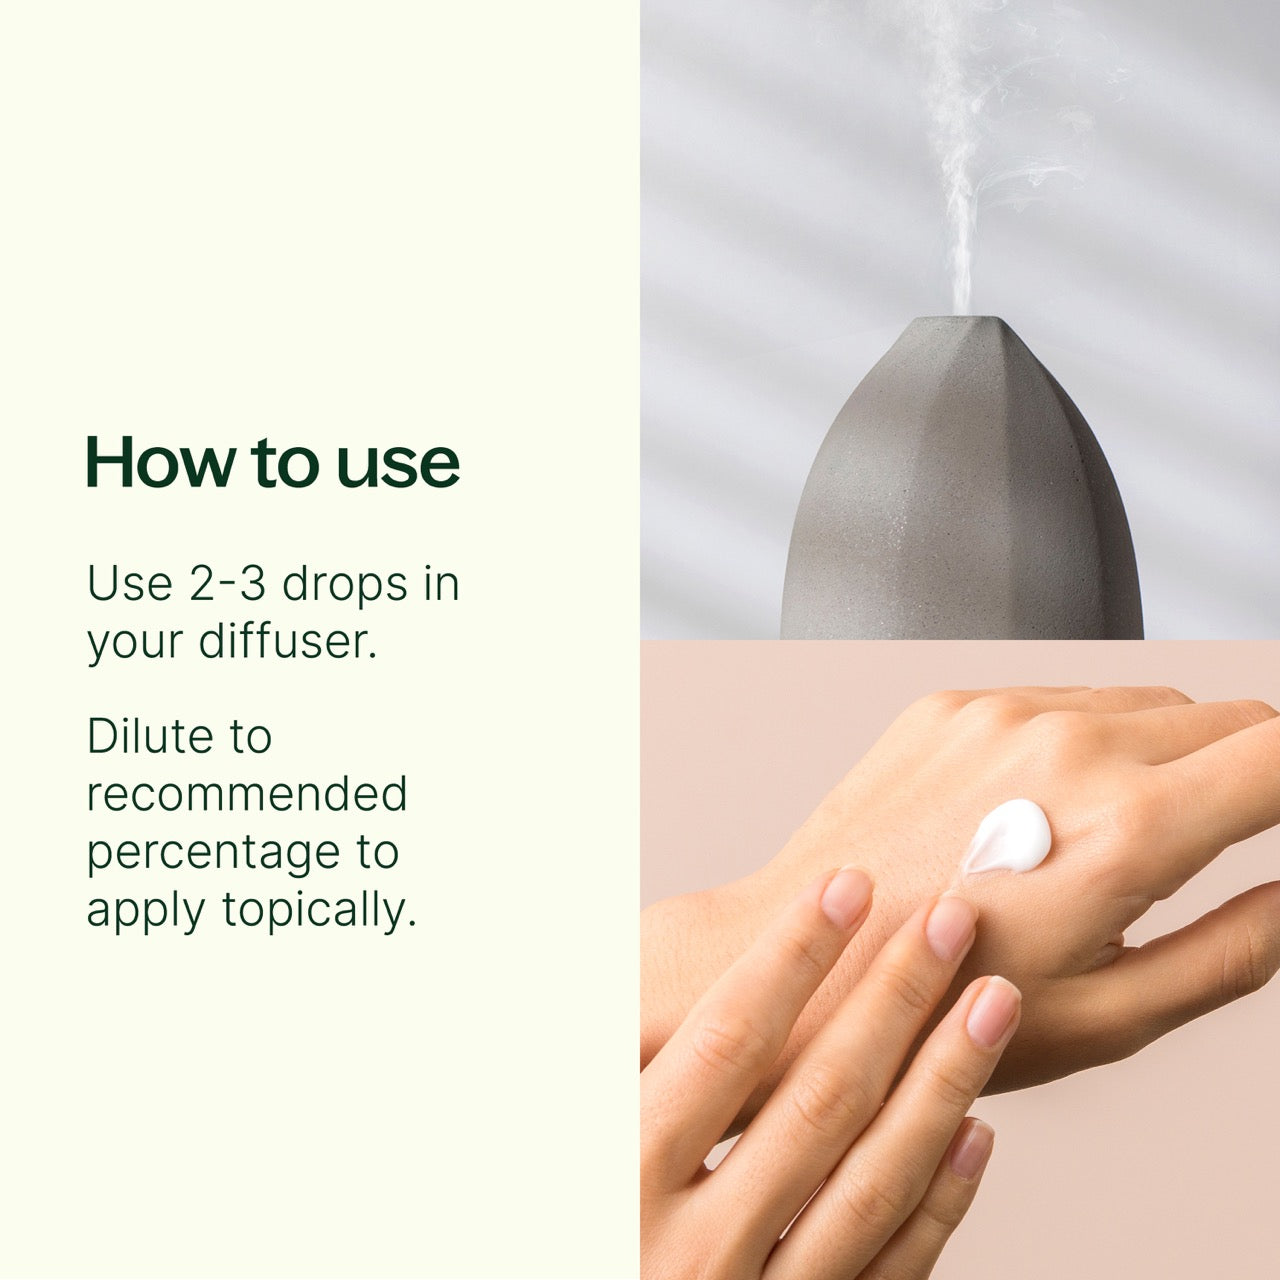 How to Use Sleep Easy Essential Oil Blend Set: use 2-3 drops in your diffuser or diluted to recommended percentage to apply topically.